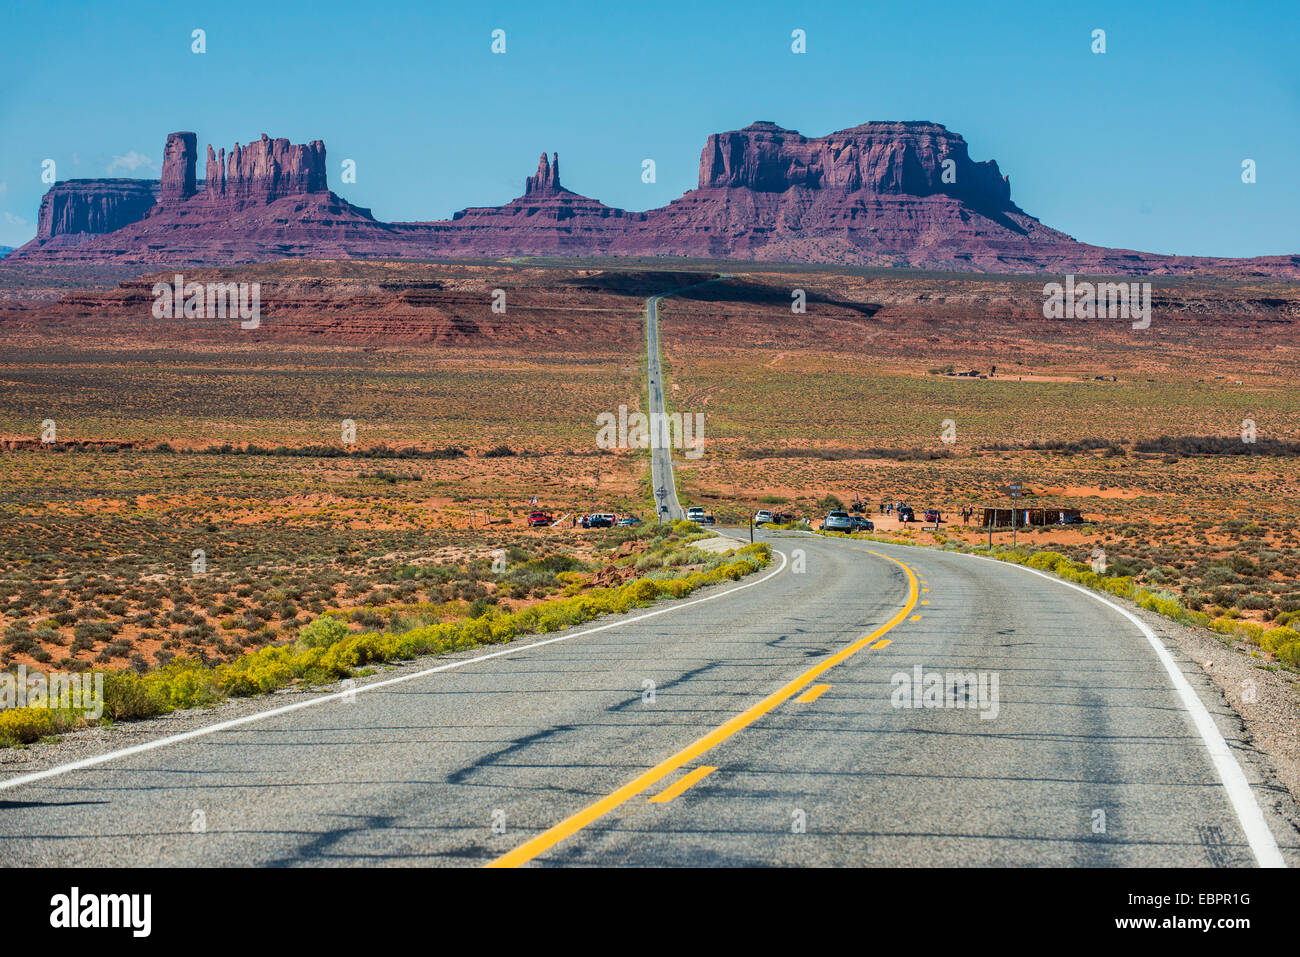 Long road leading into the Monument Valley, Arizona, United States of America, North America Stock Photo